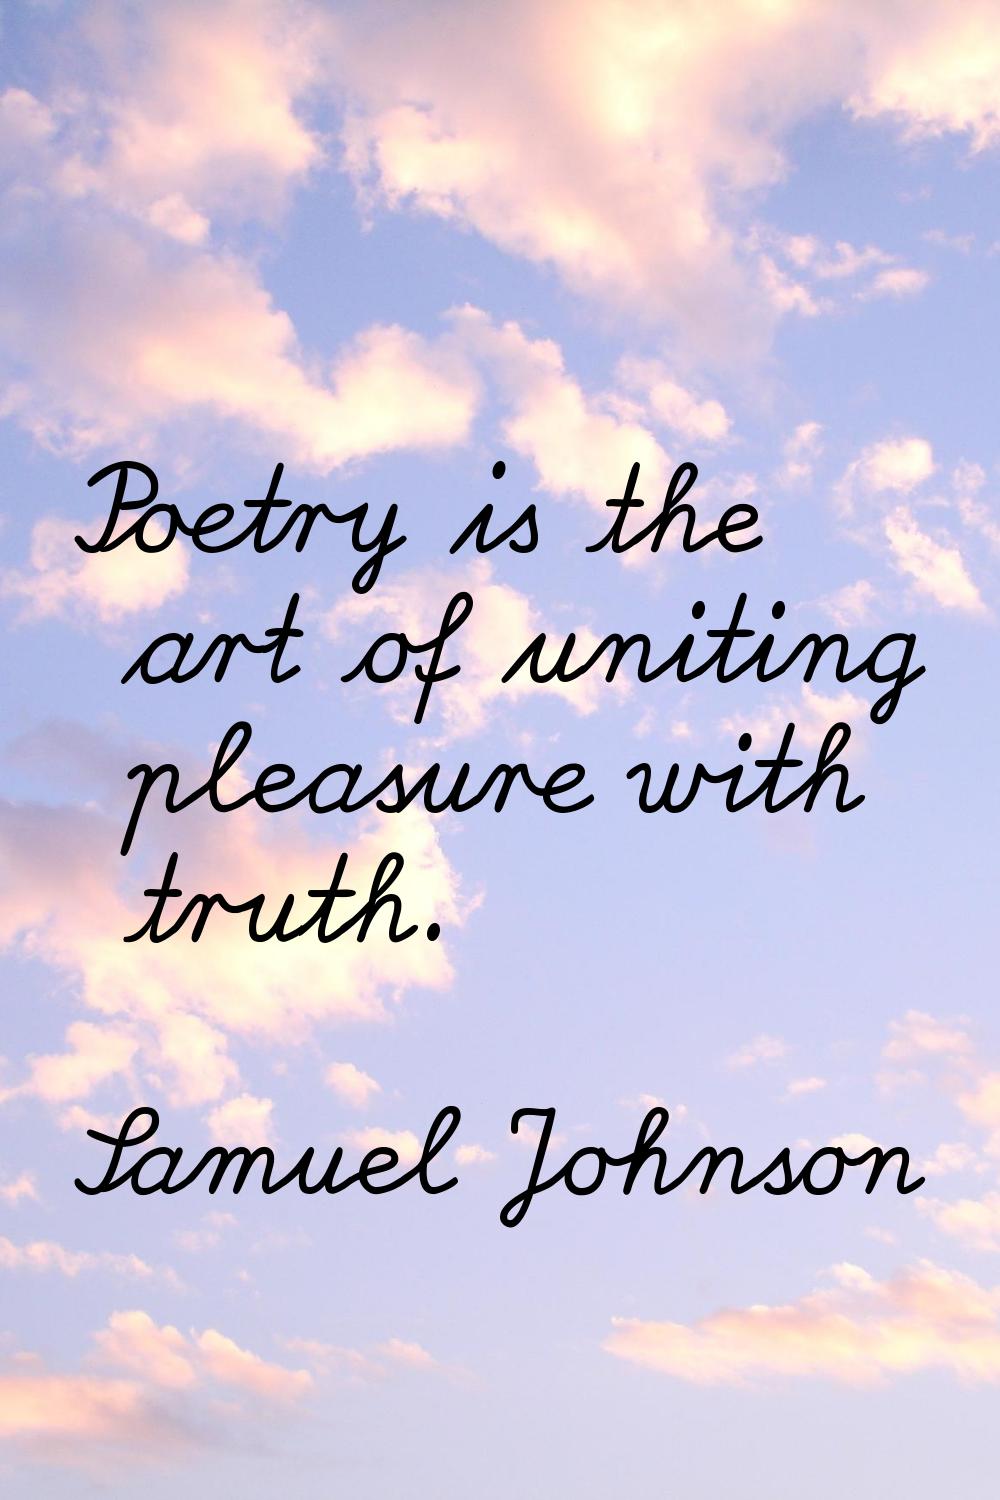 Poetry is the art of uniting pleasure with truth.